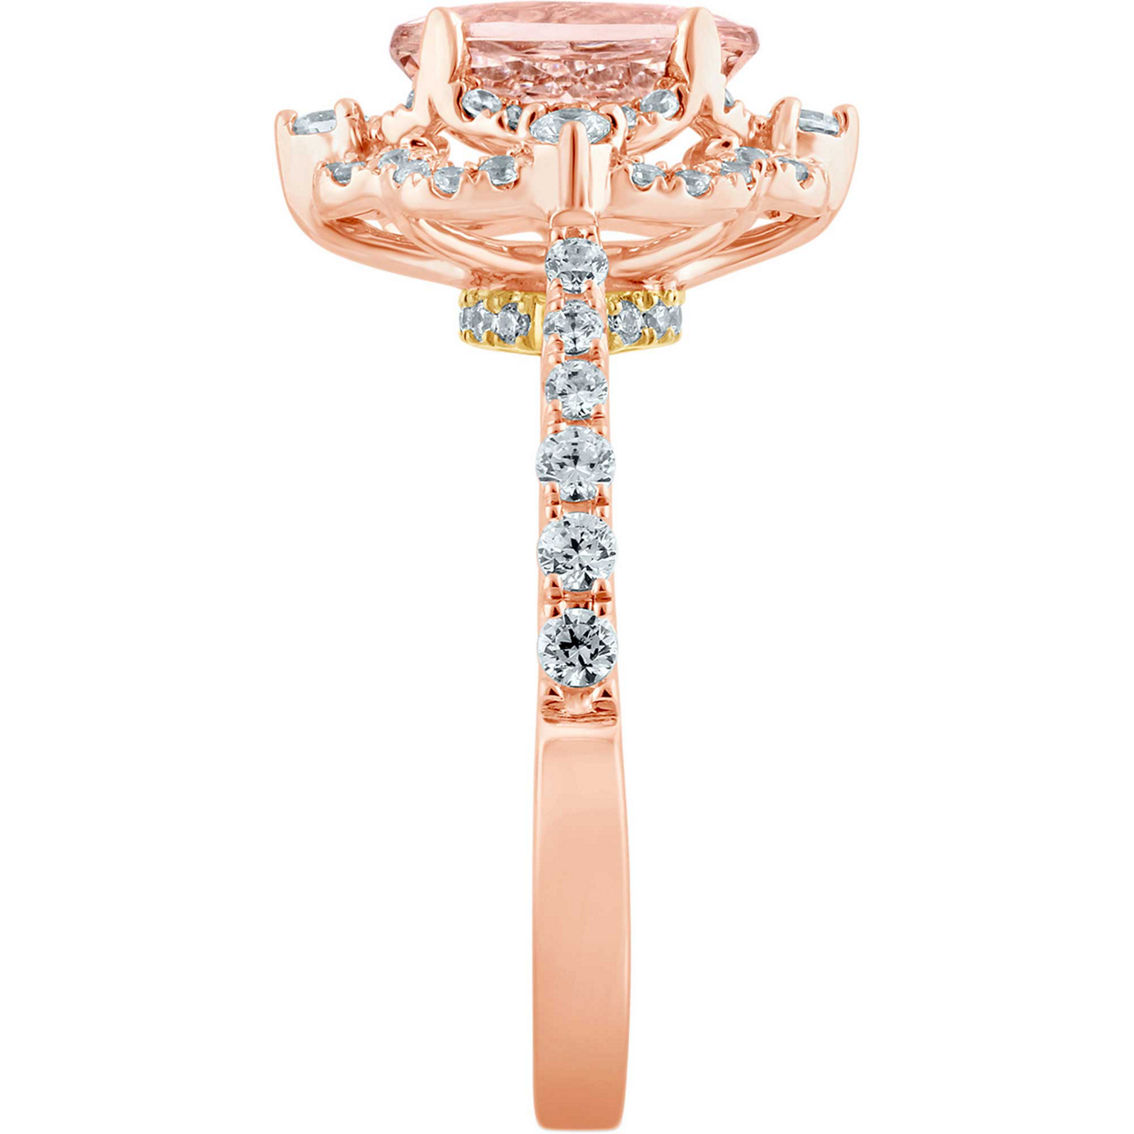 Truly Zac Posen 14K Two Tone Gold Morganite and 3/4 CTW Diamond Engagement Ring - Image 3 of 3